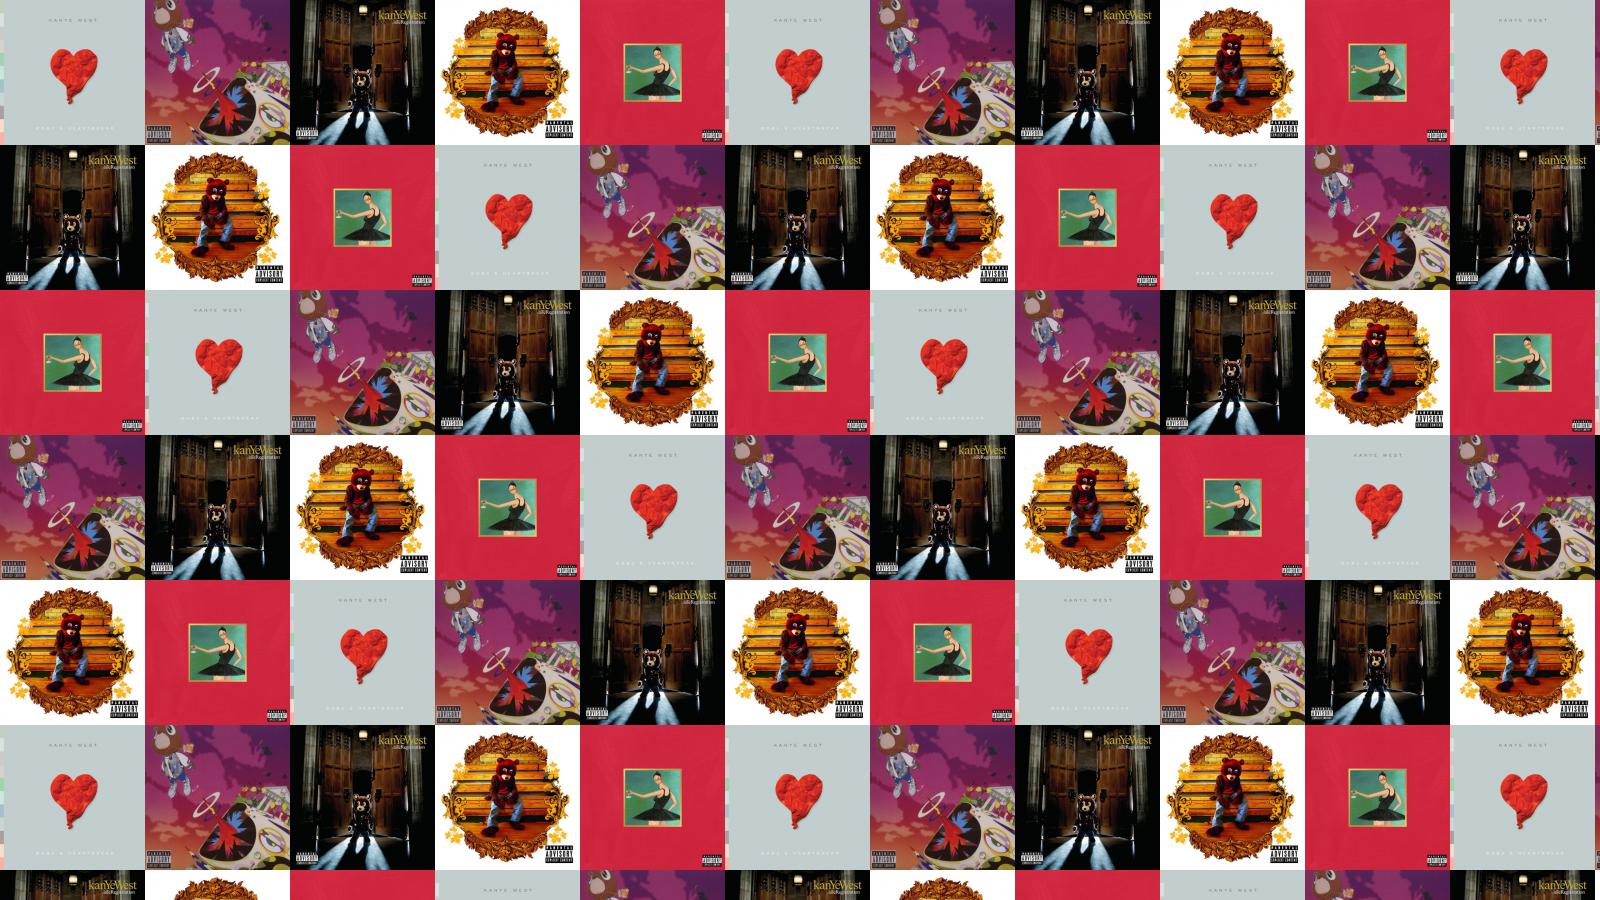 This Wallpaper With Image Of Kanye West 808s And Heartbreak